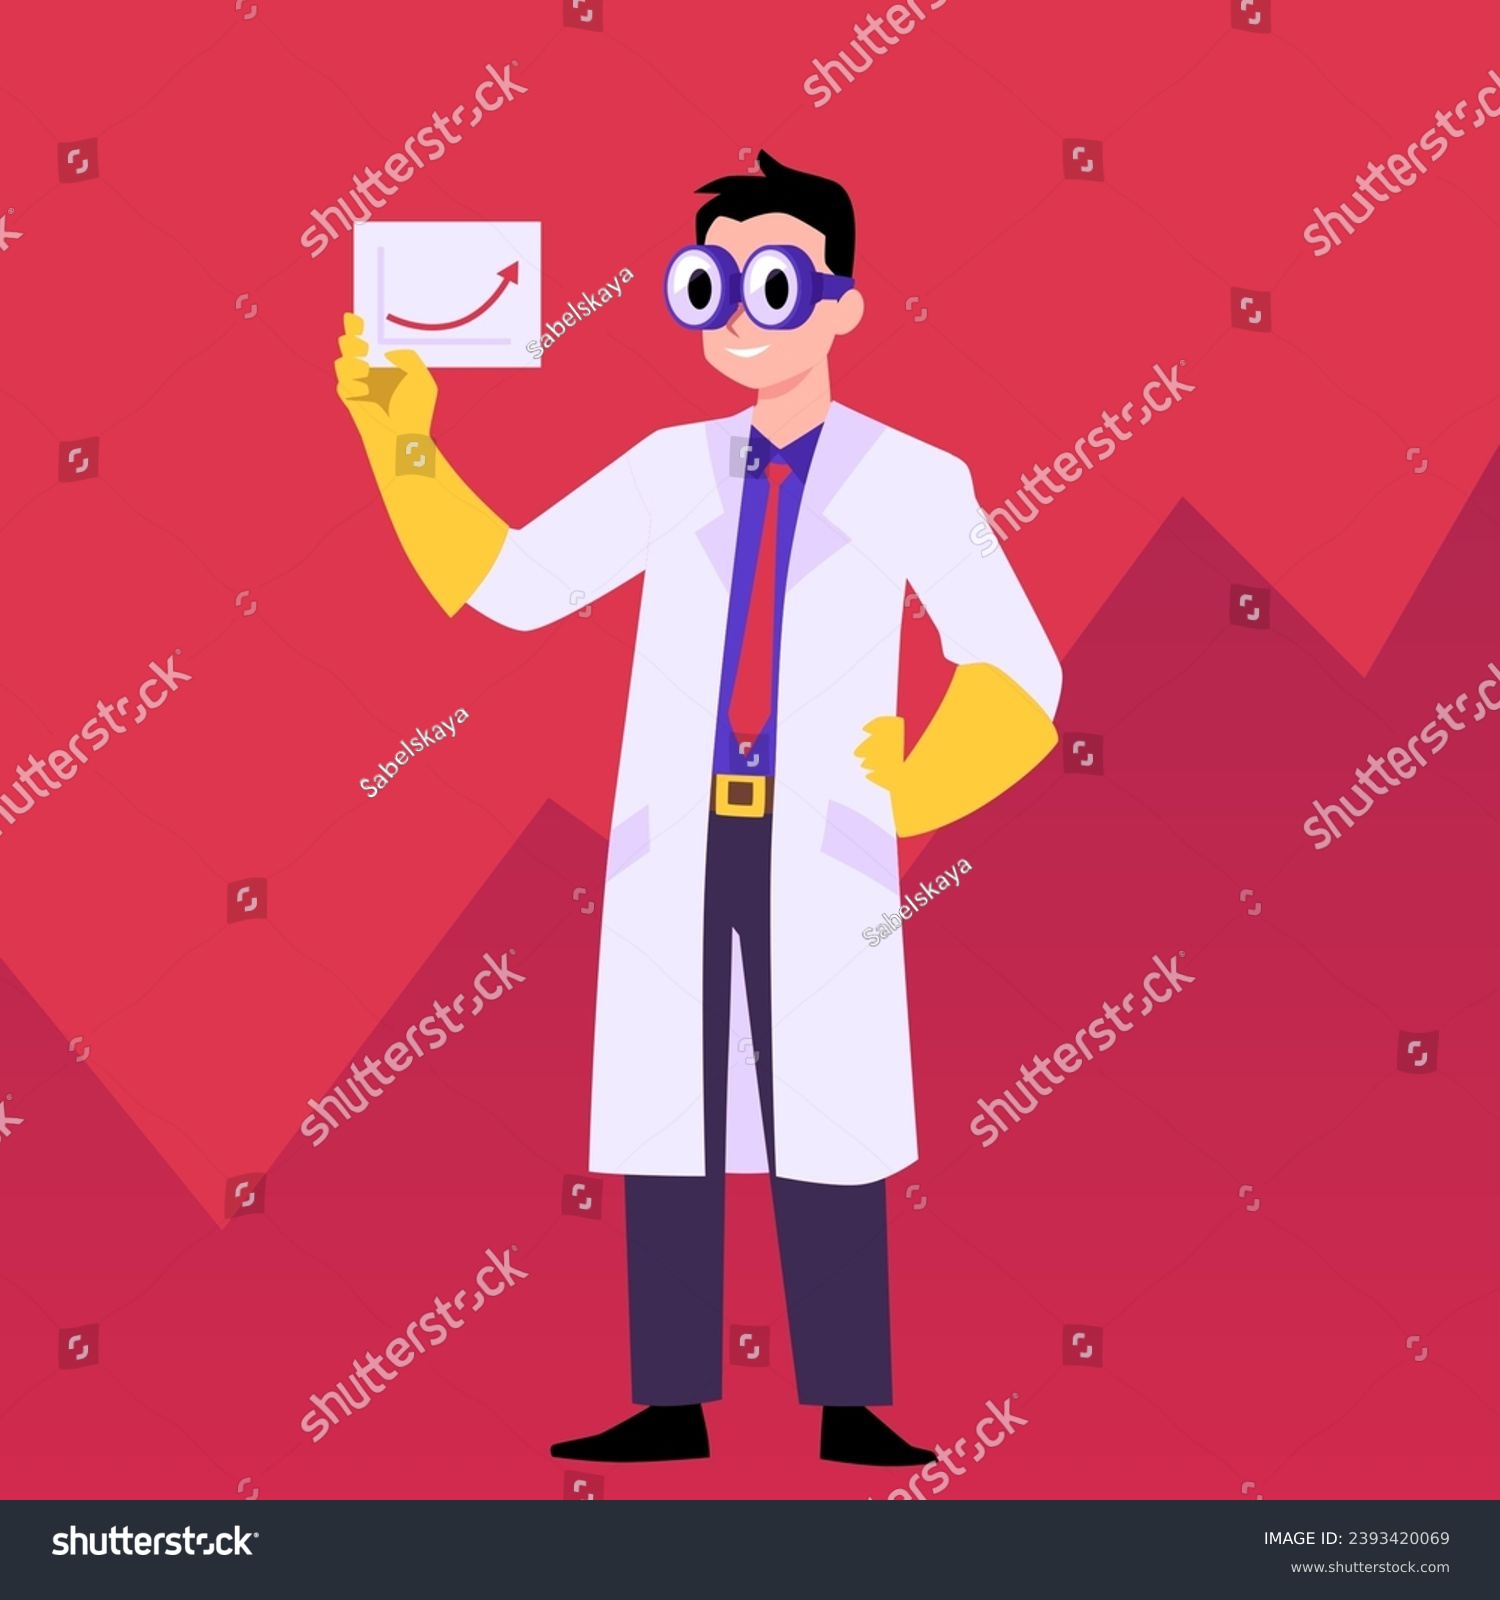 SVG of Man in strange big glasses and protective gloves holds a card in his hands, vector illustration. Drawn in flat cartoon style. Business design concept. Male character mad scientist svg